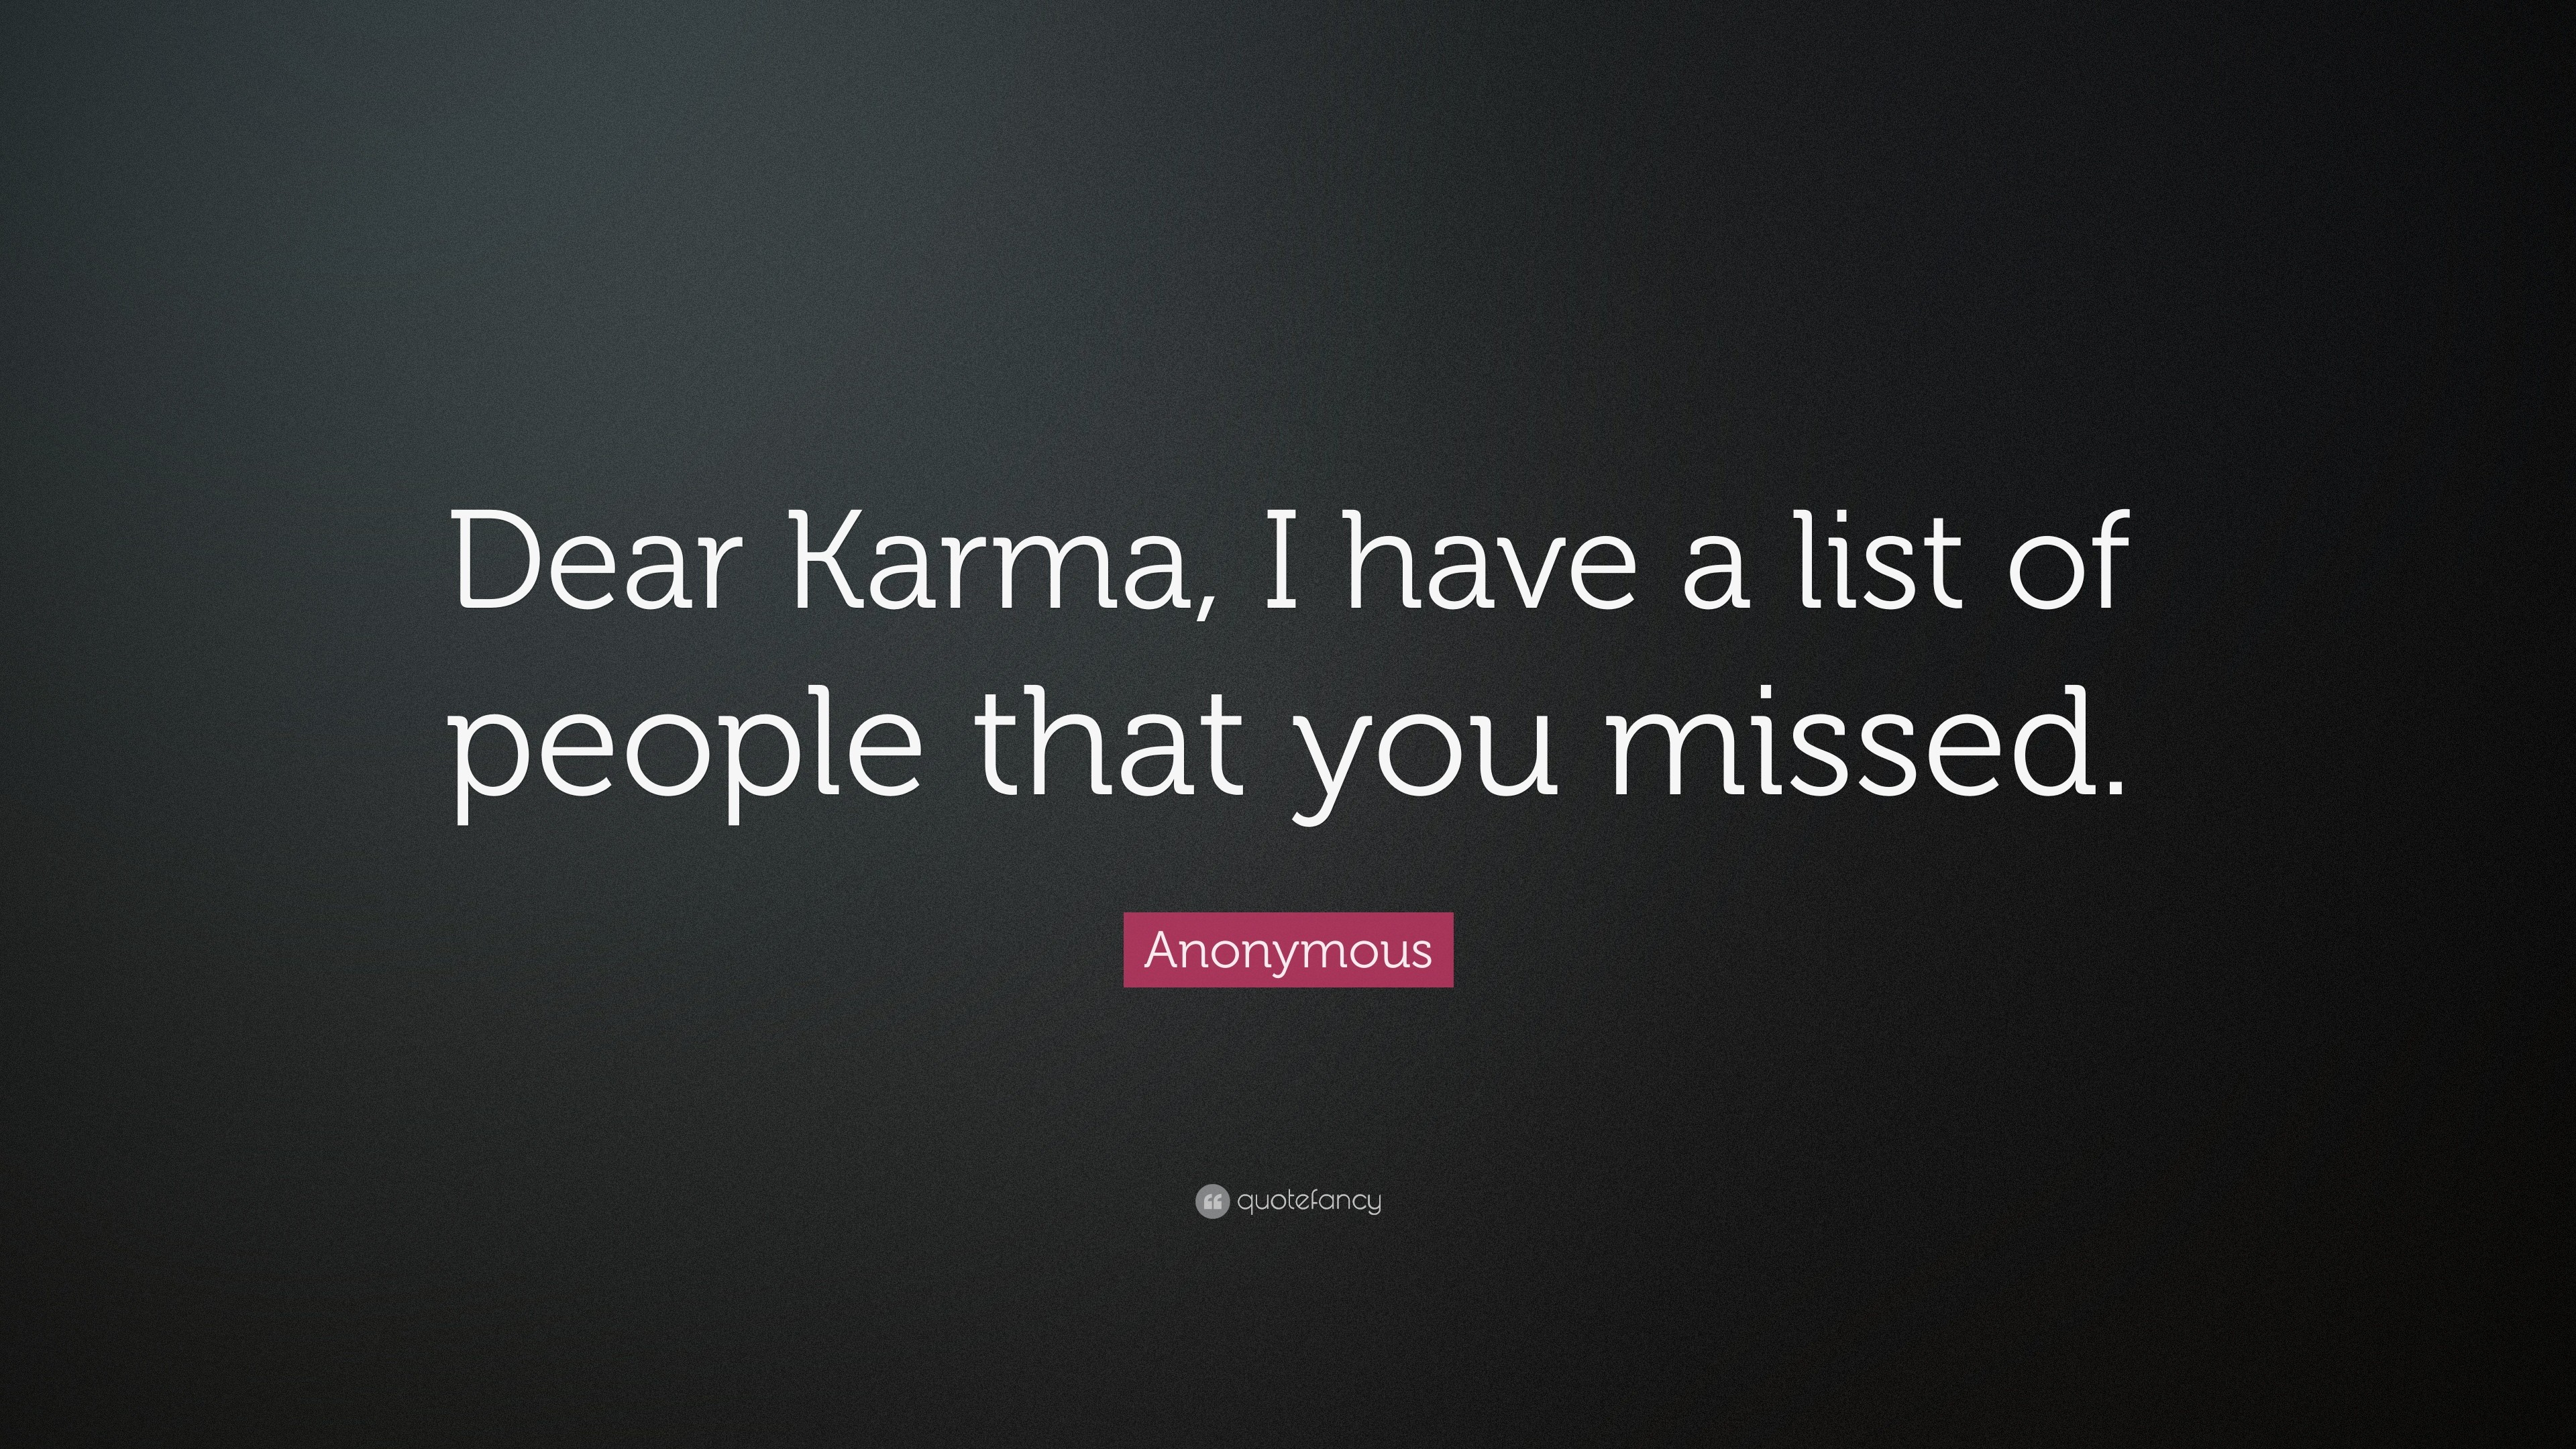 3840x2160 Funny Quotes: “Dear Karma, I have a list of people that you missed